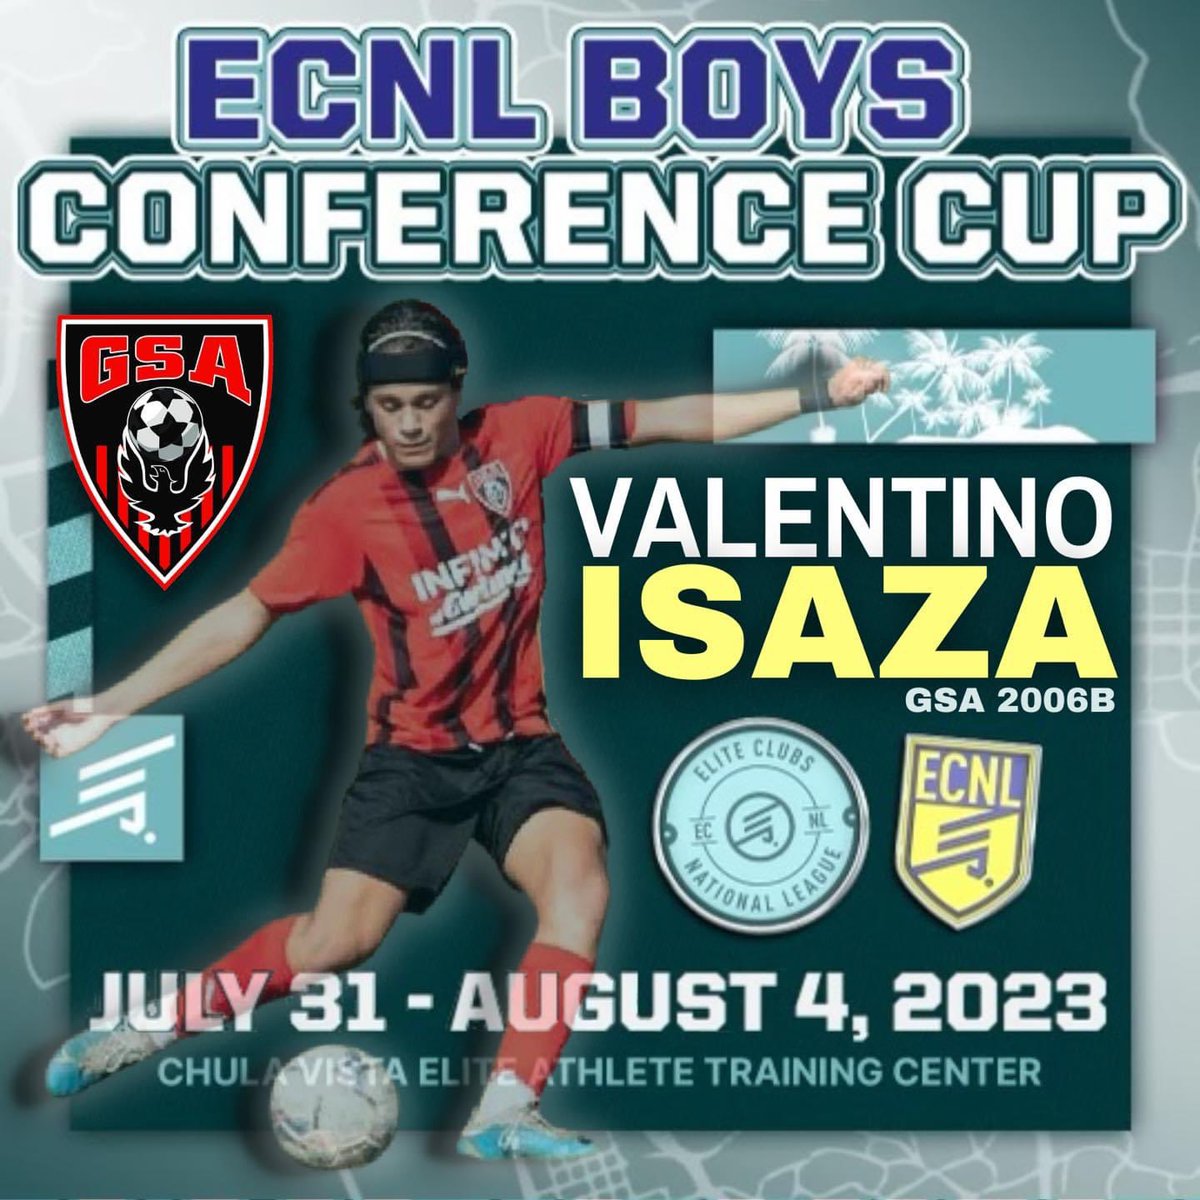 Our very own Mountain View Bear! GSA SPOTLIGHT🌟: 06B ECNL player, Tino Isaza, has been selected by ECNL player identification staff to the Team East roster for the 2023 ECNL Boys Conference Cup! Keep pushing the limit, Tino!  #GSAStrong #GSABoys #ECNL

GO BEARS! @MVHSBearsSoccer